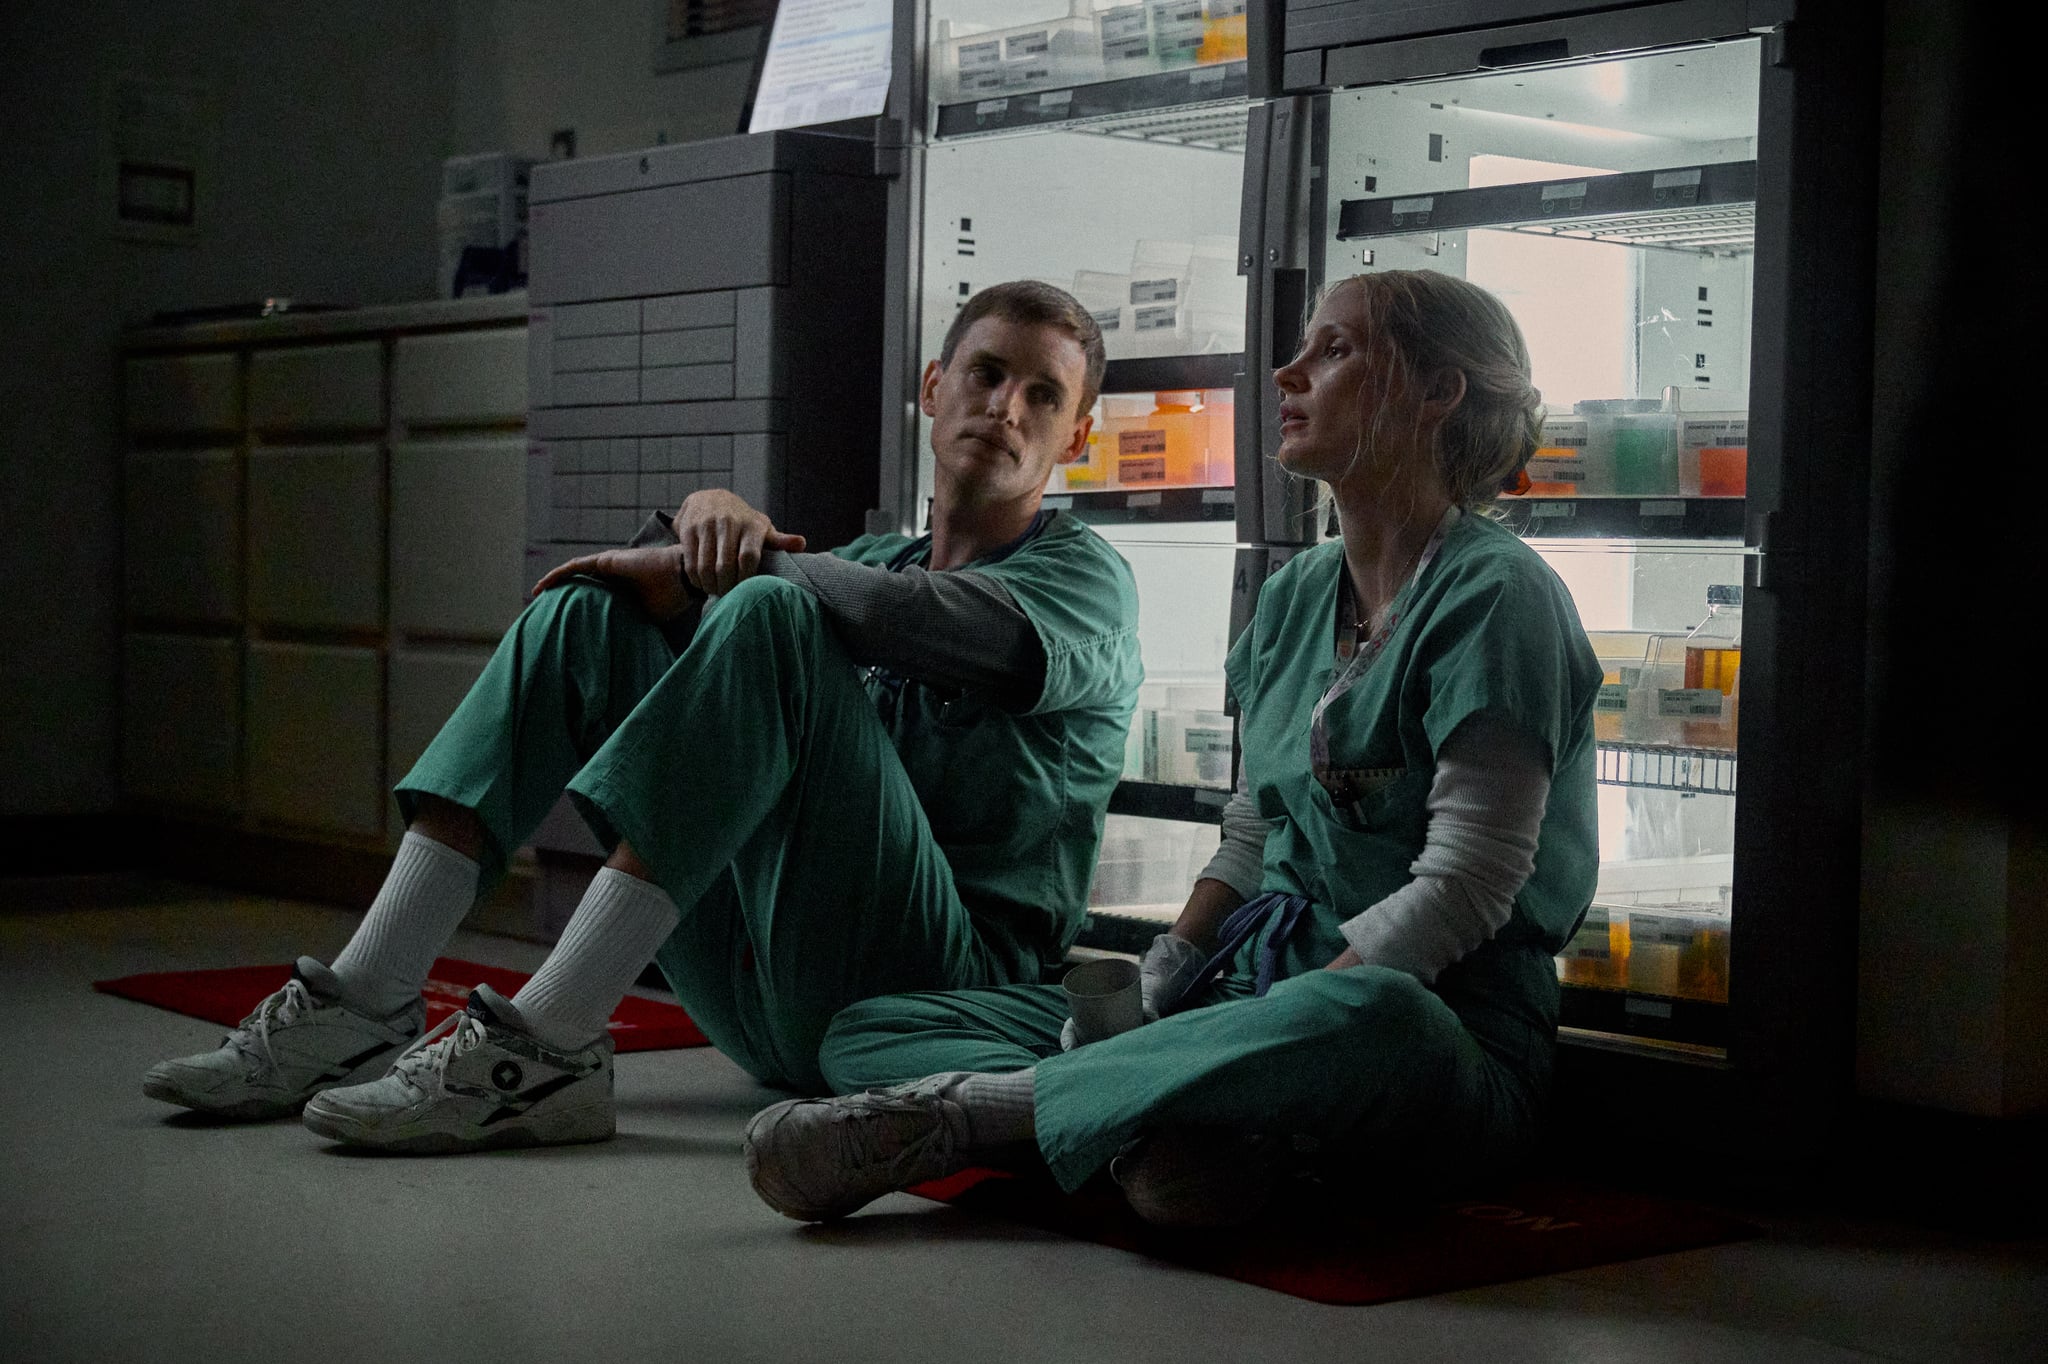 The Unsettling True Story Behind Netflix’s New True Crime, “The Good Nurse”